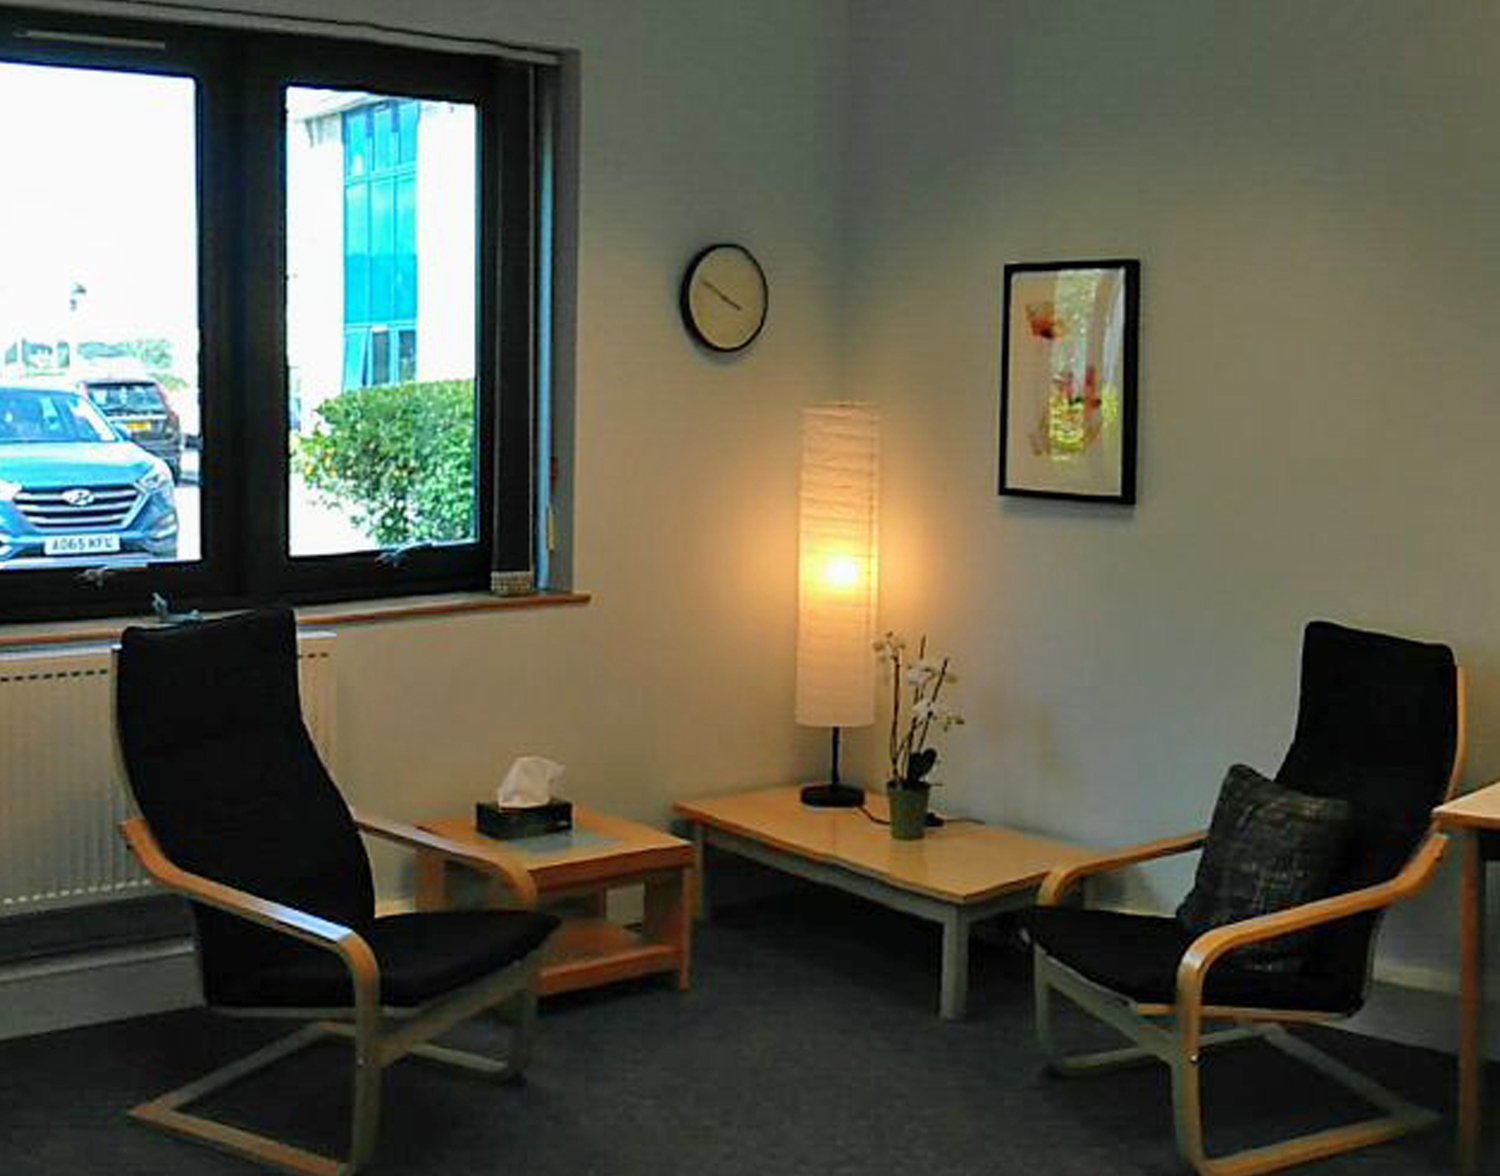 Gallery Photo of My Counselling Room in Lowestoft has full reception facilities during office hours as well as disabled access and toilets.